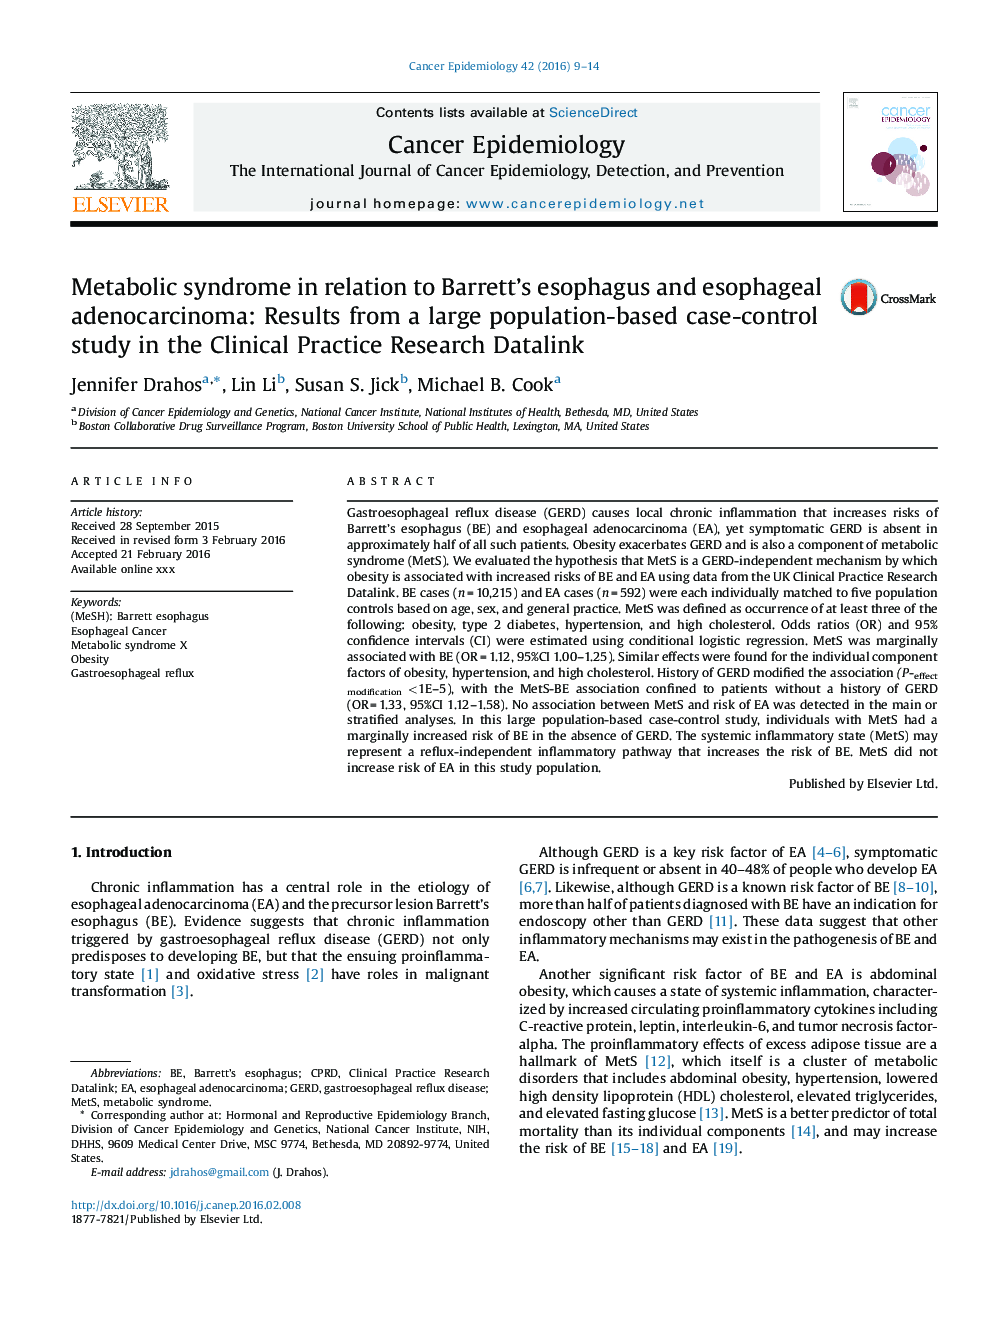 Metabolic syndrome in relation to Barrettâ¿¿s esophagus and esophageal adenocarcinoma: Results from a large population-based case-control study in the Clinical Practice Research Datalink